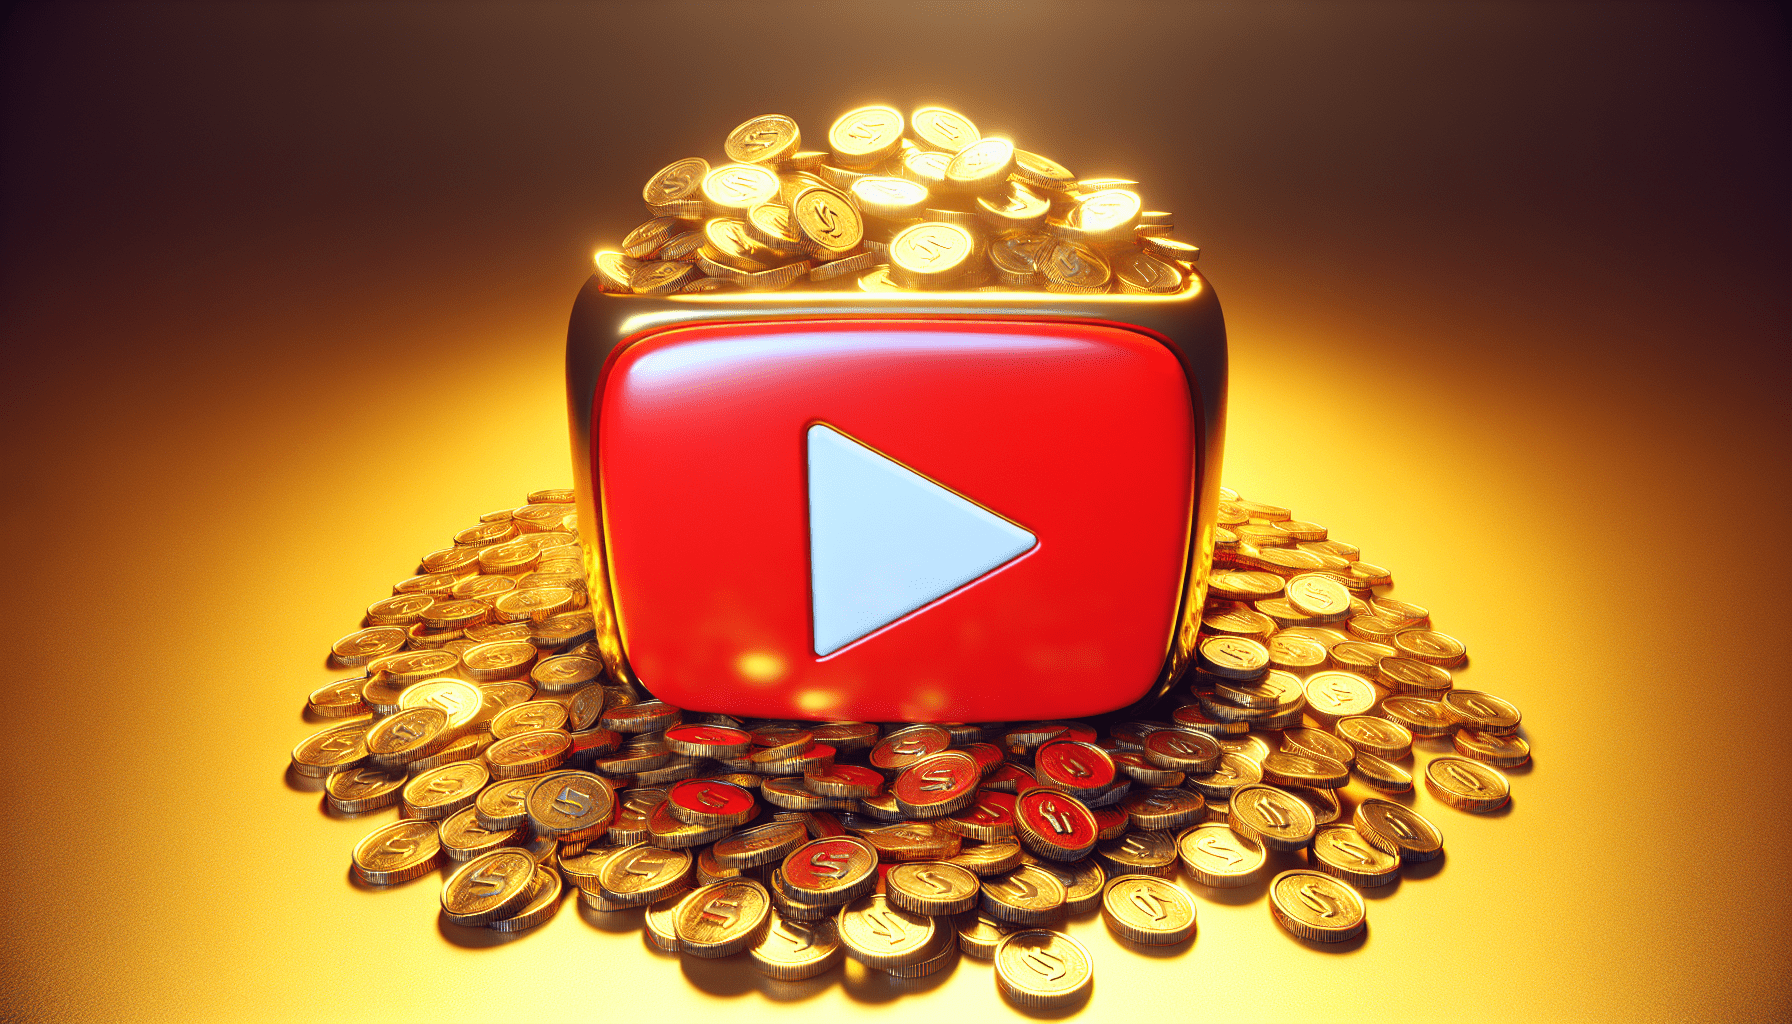 How Many YouTube Views Do I Need To Make $5000 Per Month?